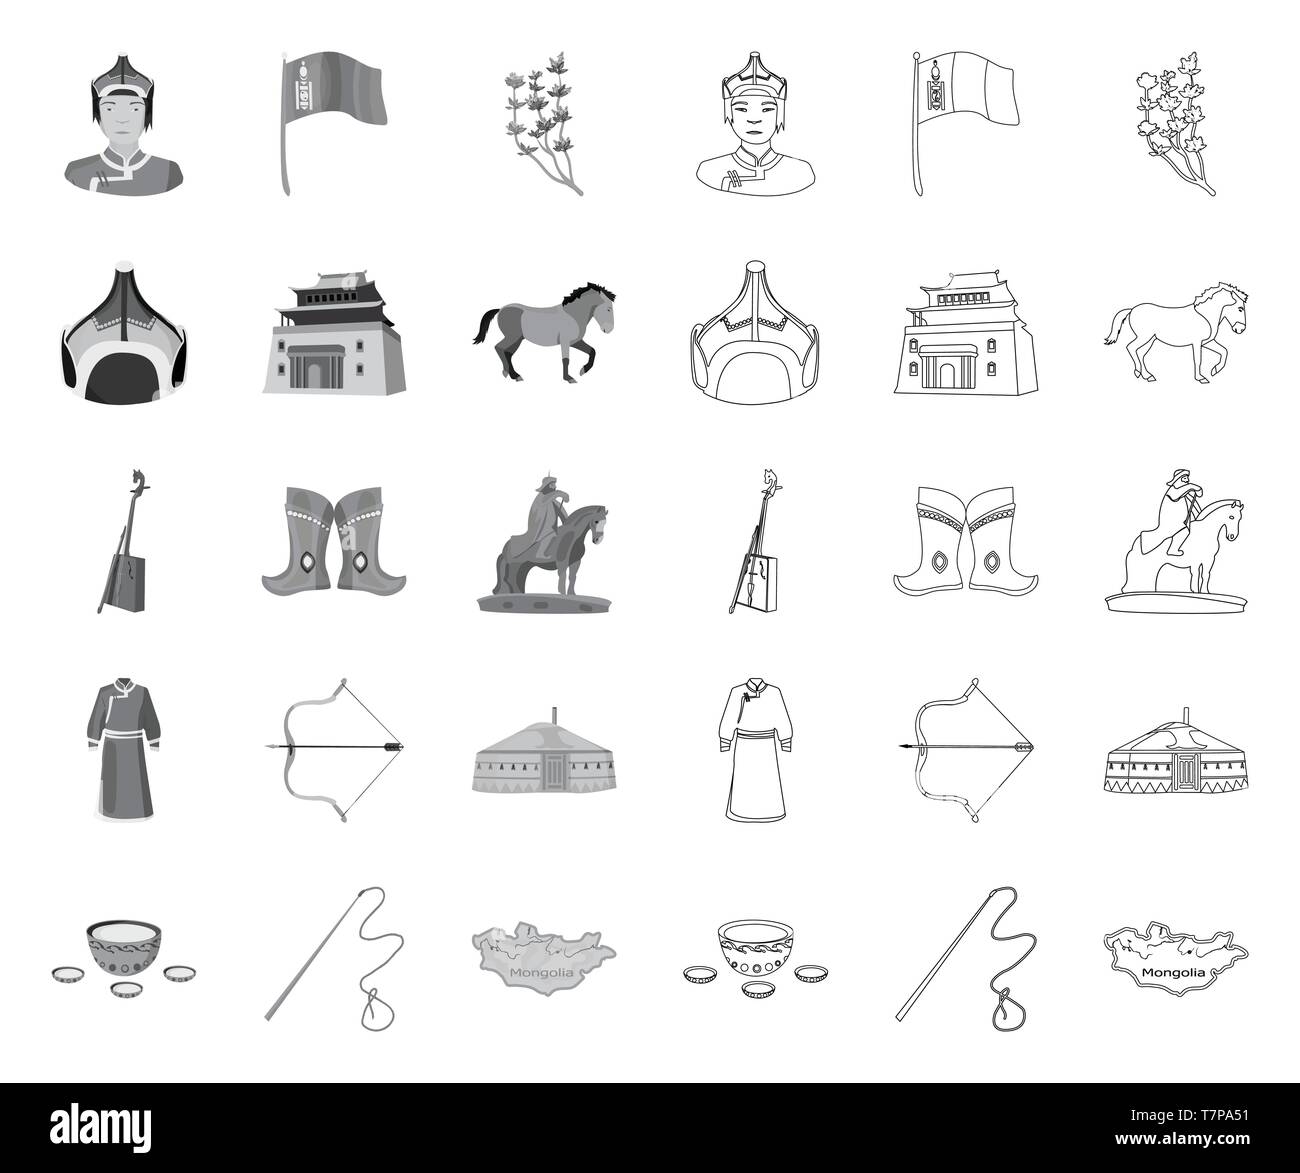 arms,arrow,belt,bow,buddhism,building,cashmere,coat,collection,country,culture,flag,flower,fur,genghis,gutuly,headdress,horse,hudak,icon,illustration,instrument,khan,kialis,kumis,landmark,leather,map,monastery,mongol,mongolia,mono,outline,monument,musical,nature,religion,robe,set,shoes,sign,spear,temple,territory,tradition,travel,vector,whip,wool,yurt Vector Vectors , Stock Vector